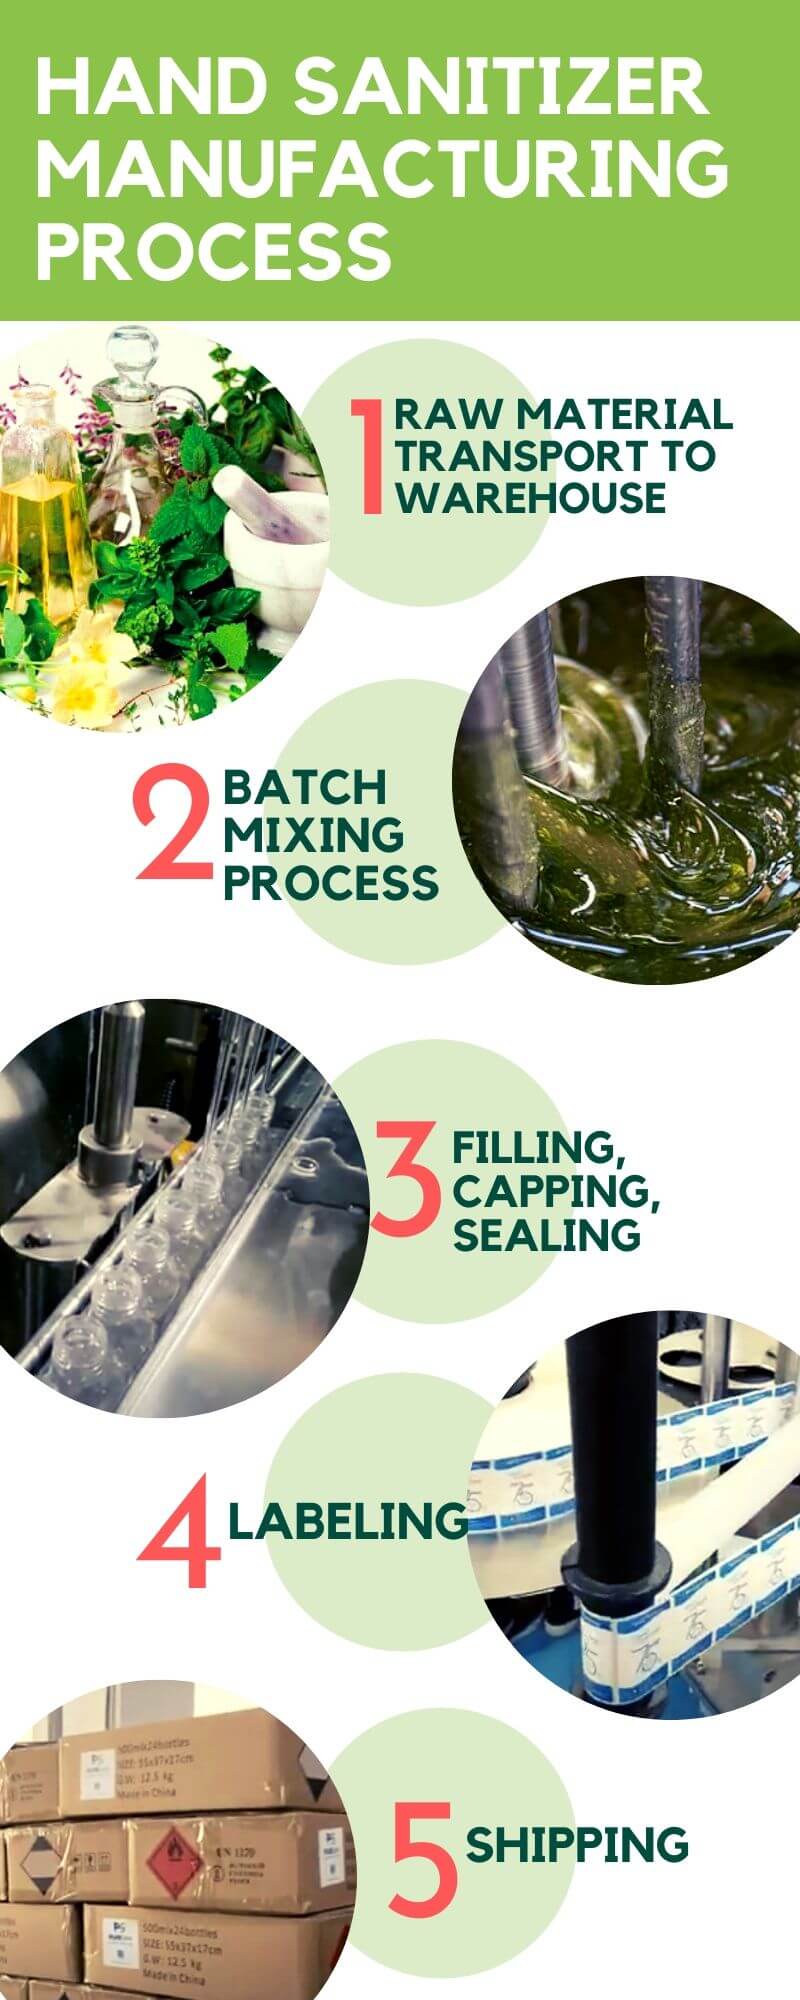 hand sanitizer manufacturing process steps infographic